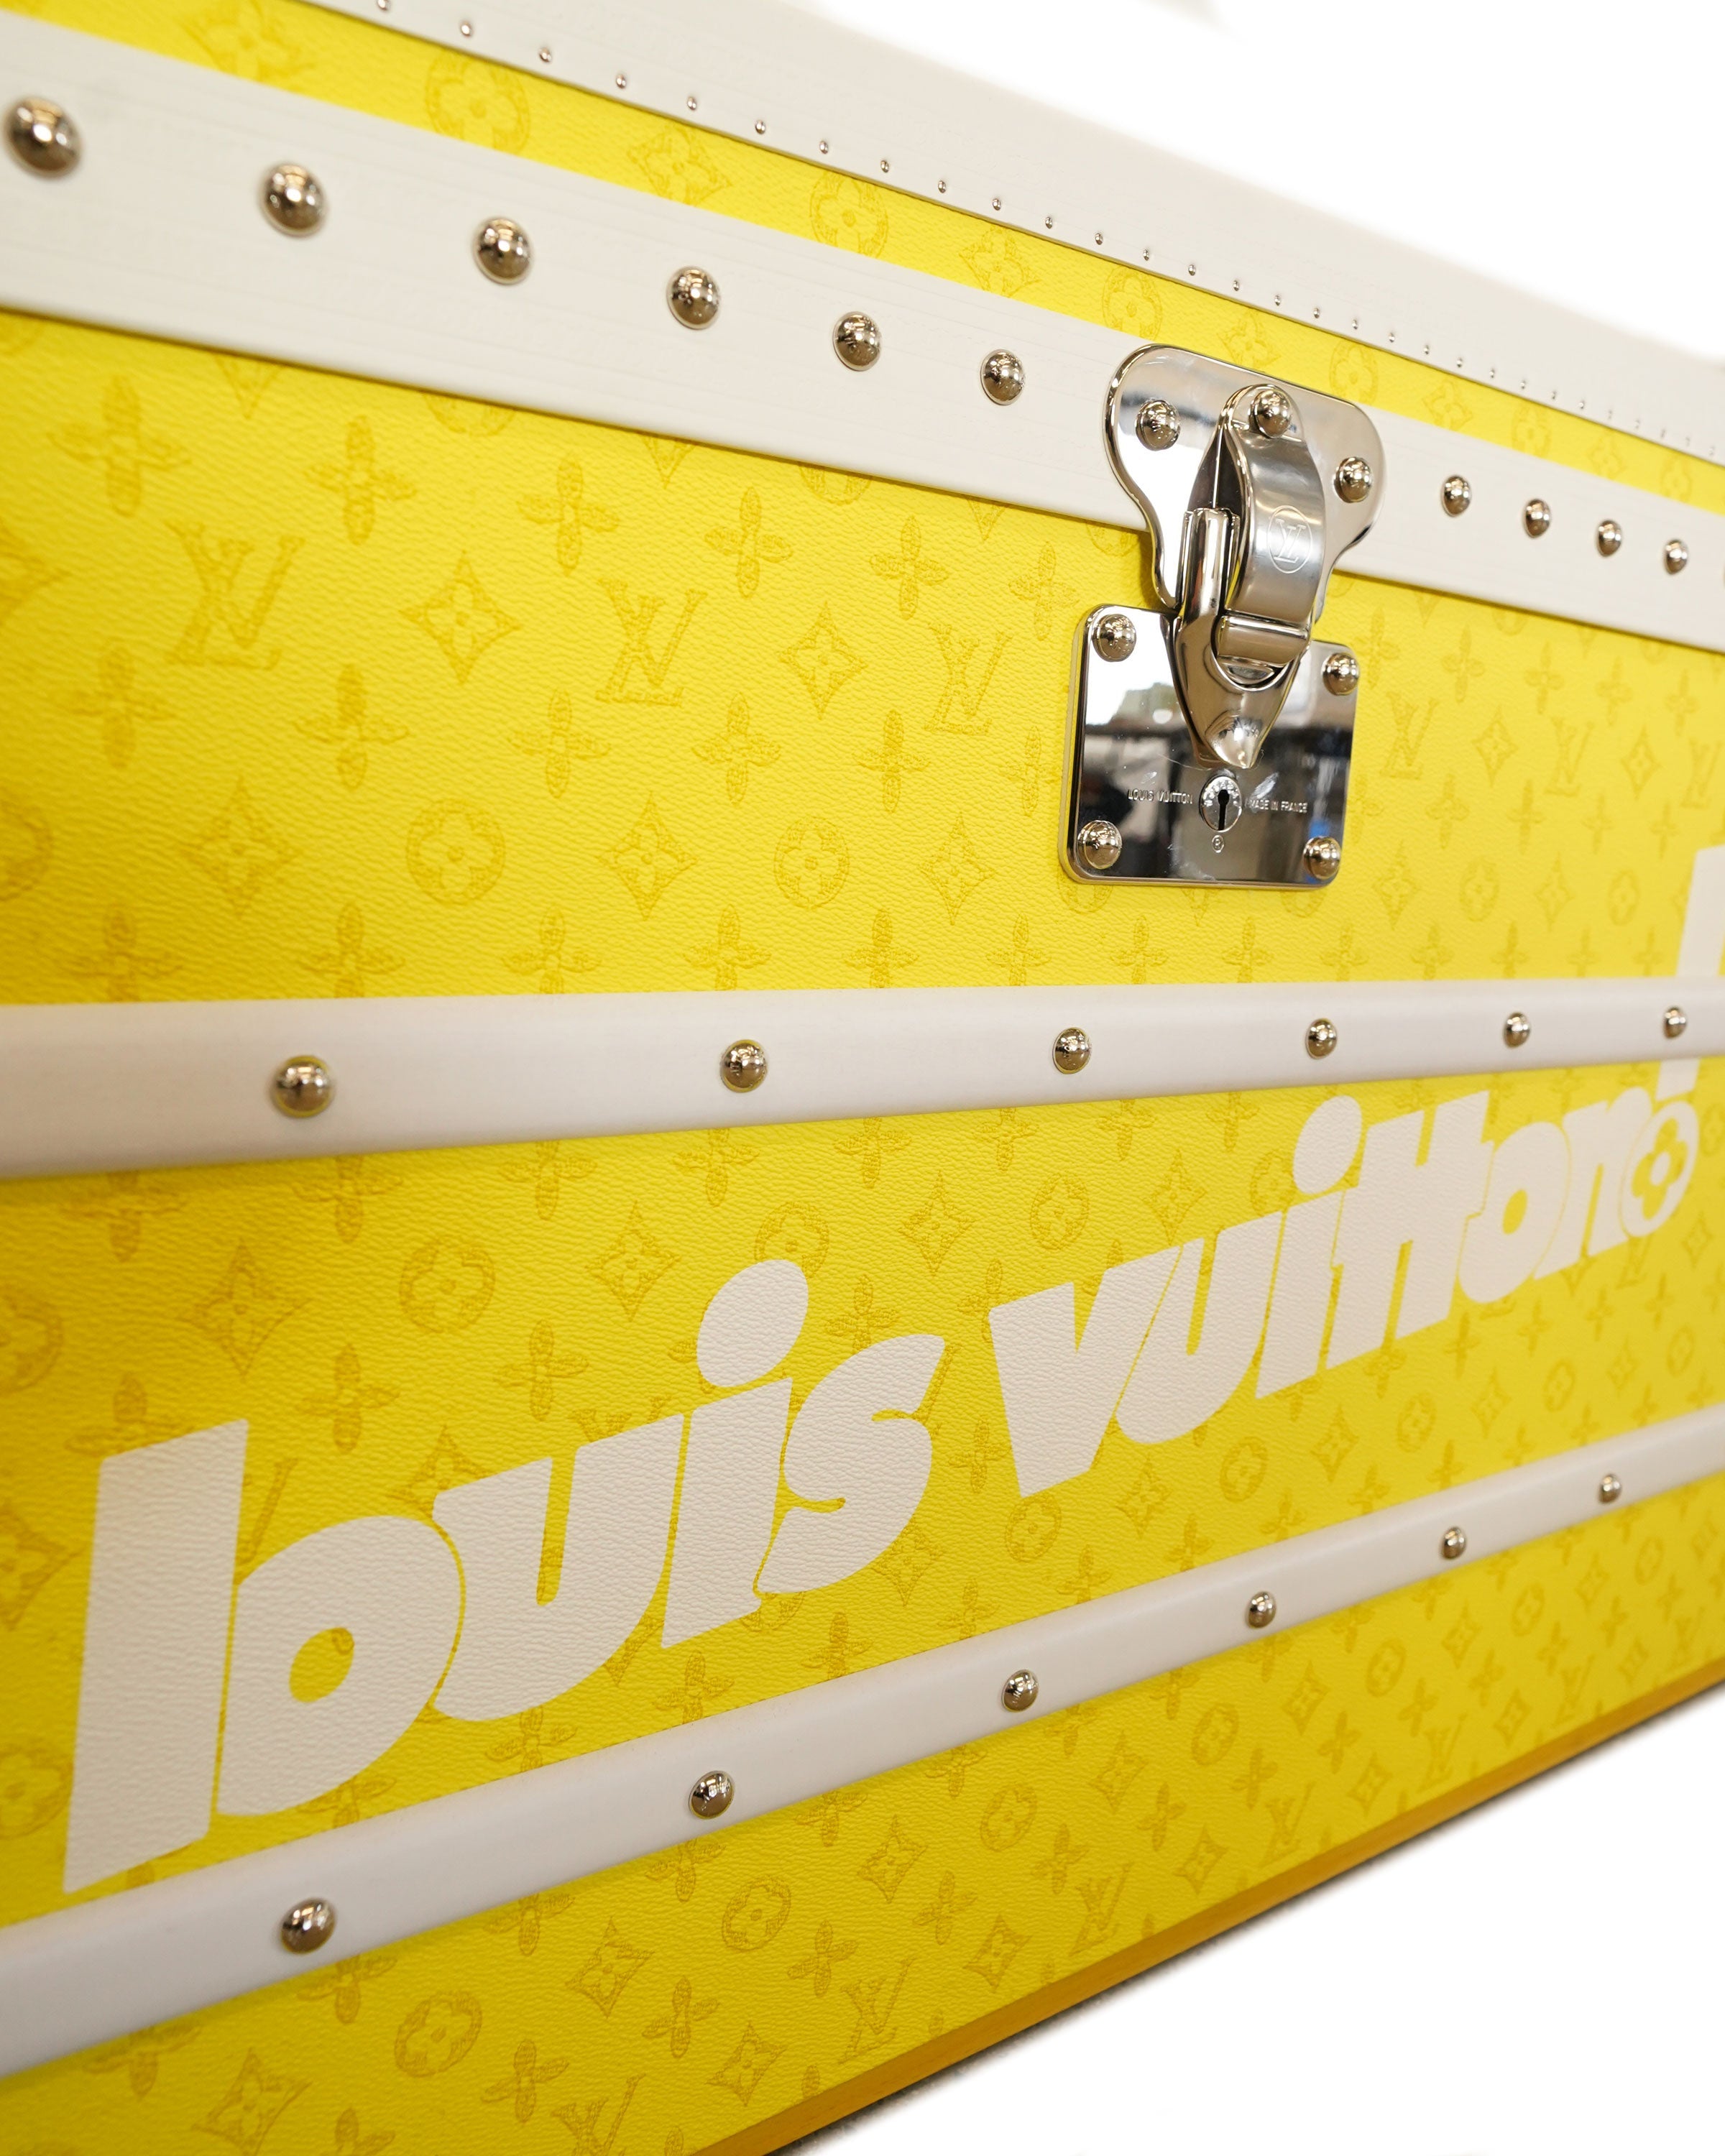 Limited Edition Yellow Steamer Trunk by Virgil Abloh (2021)